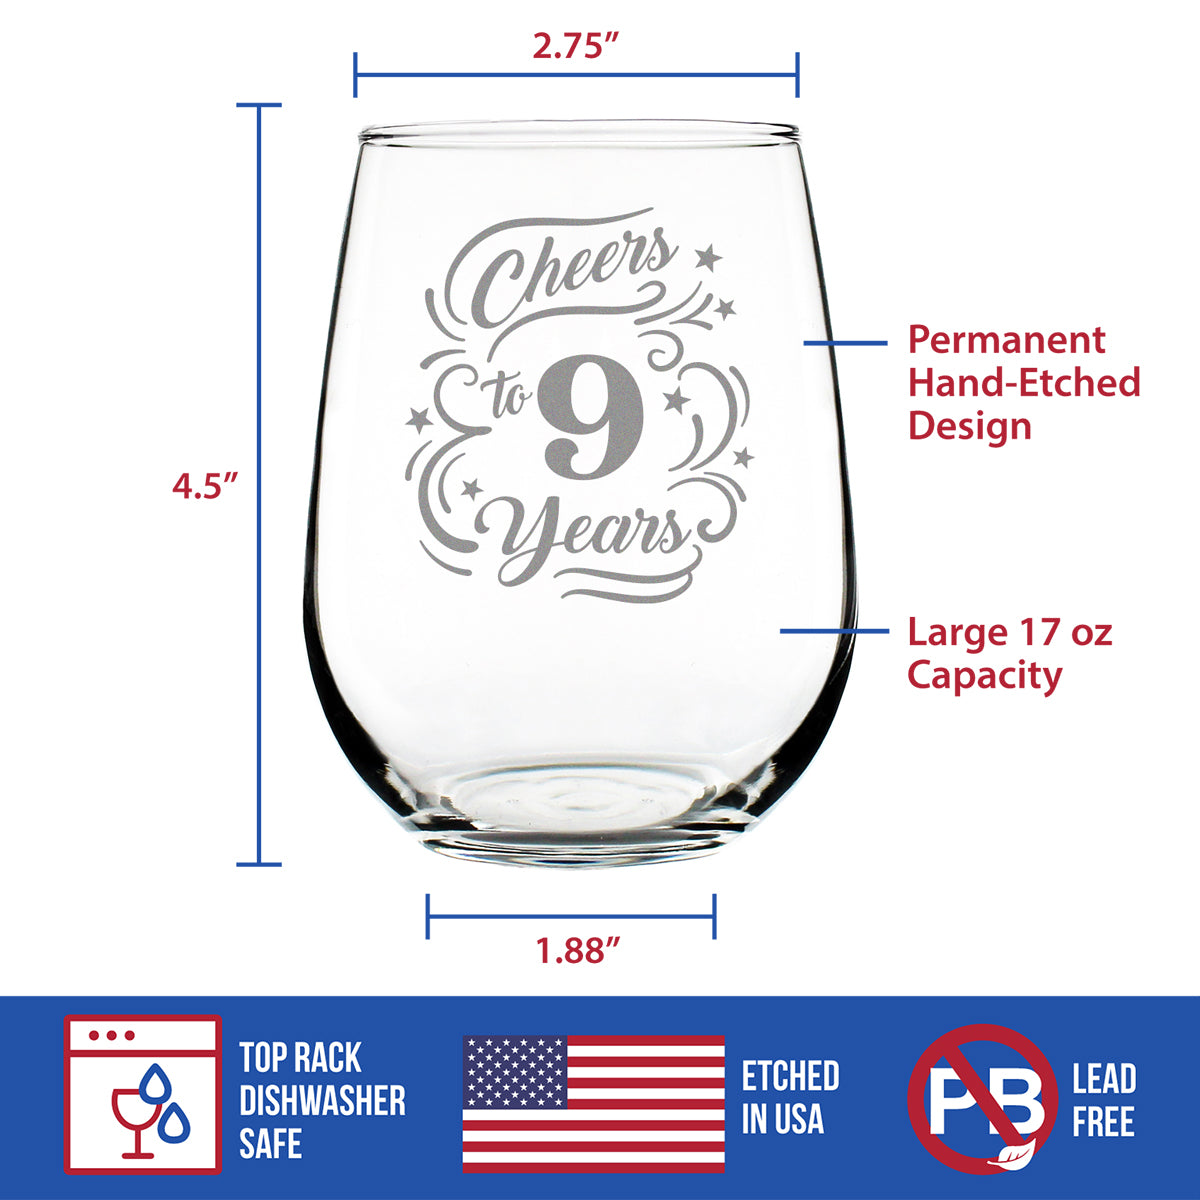 Cheers to 9 Years - Stemless Wine Glass Gifts for Women &amp; Men - 9th Anniversary Party Decor - Large 17 Oz Glasses